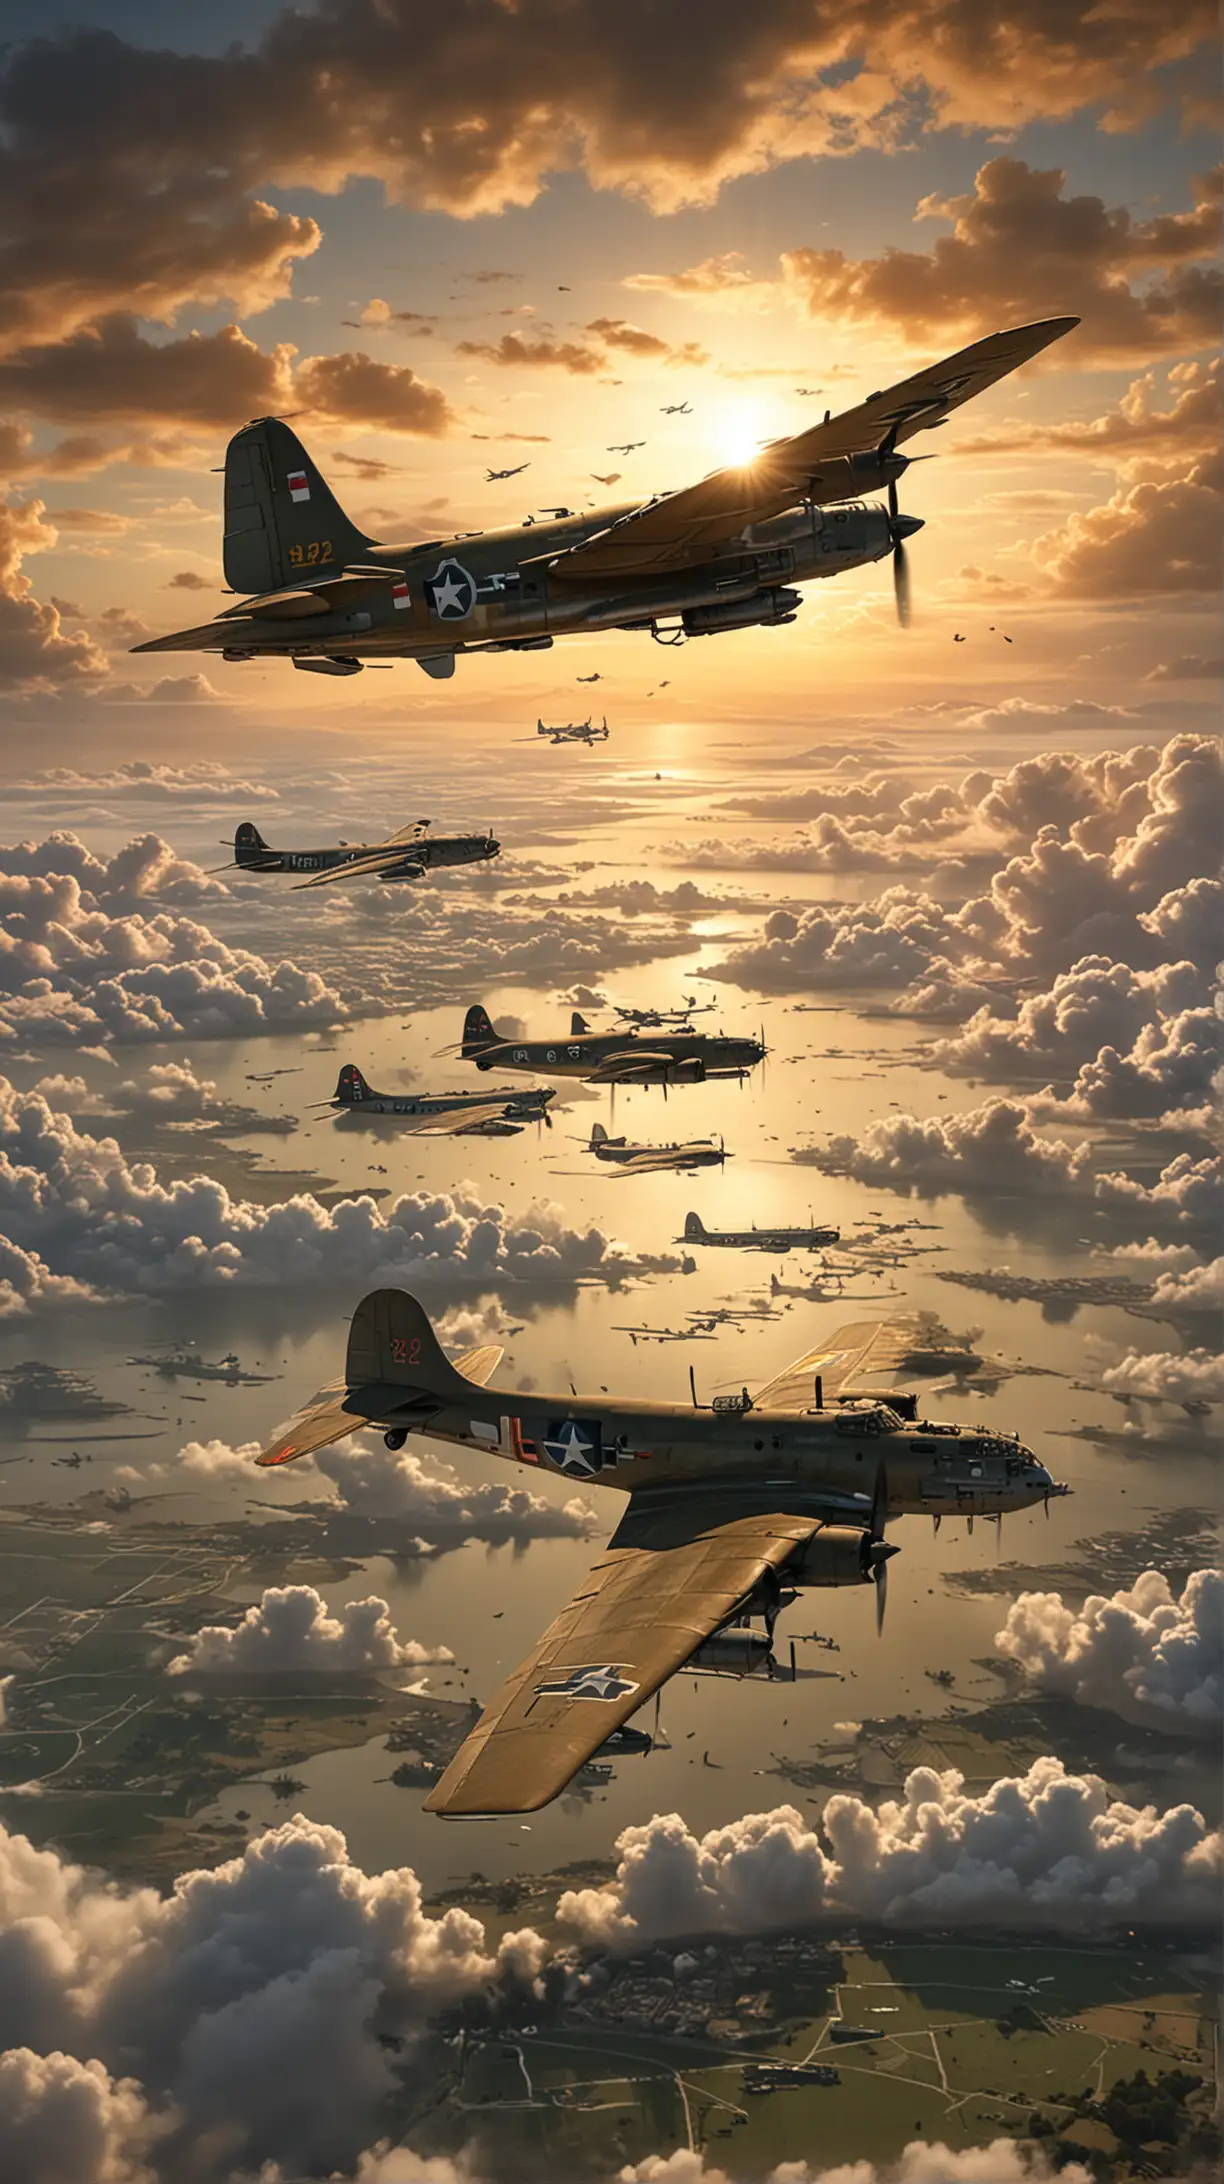 Generate a detailed illustration of American planes flying above Japan during World War II. The scene should depict a squadron of B-29 Superfortresses soaring over a Japanese landscape. The plane should be shown in mid-flight, with clouds and the distant Japanese terrain visible below. The time of day is early morning, with the sunrise casting a golden hue over the scene. Include a mix of historical accuracy and artistic elements to capture the intensity and atmosphere of the wartime setting.